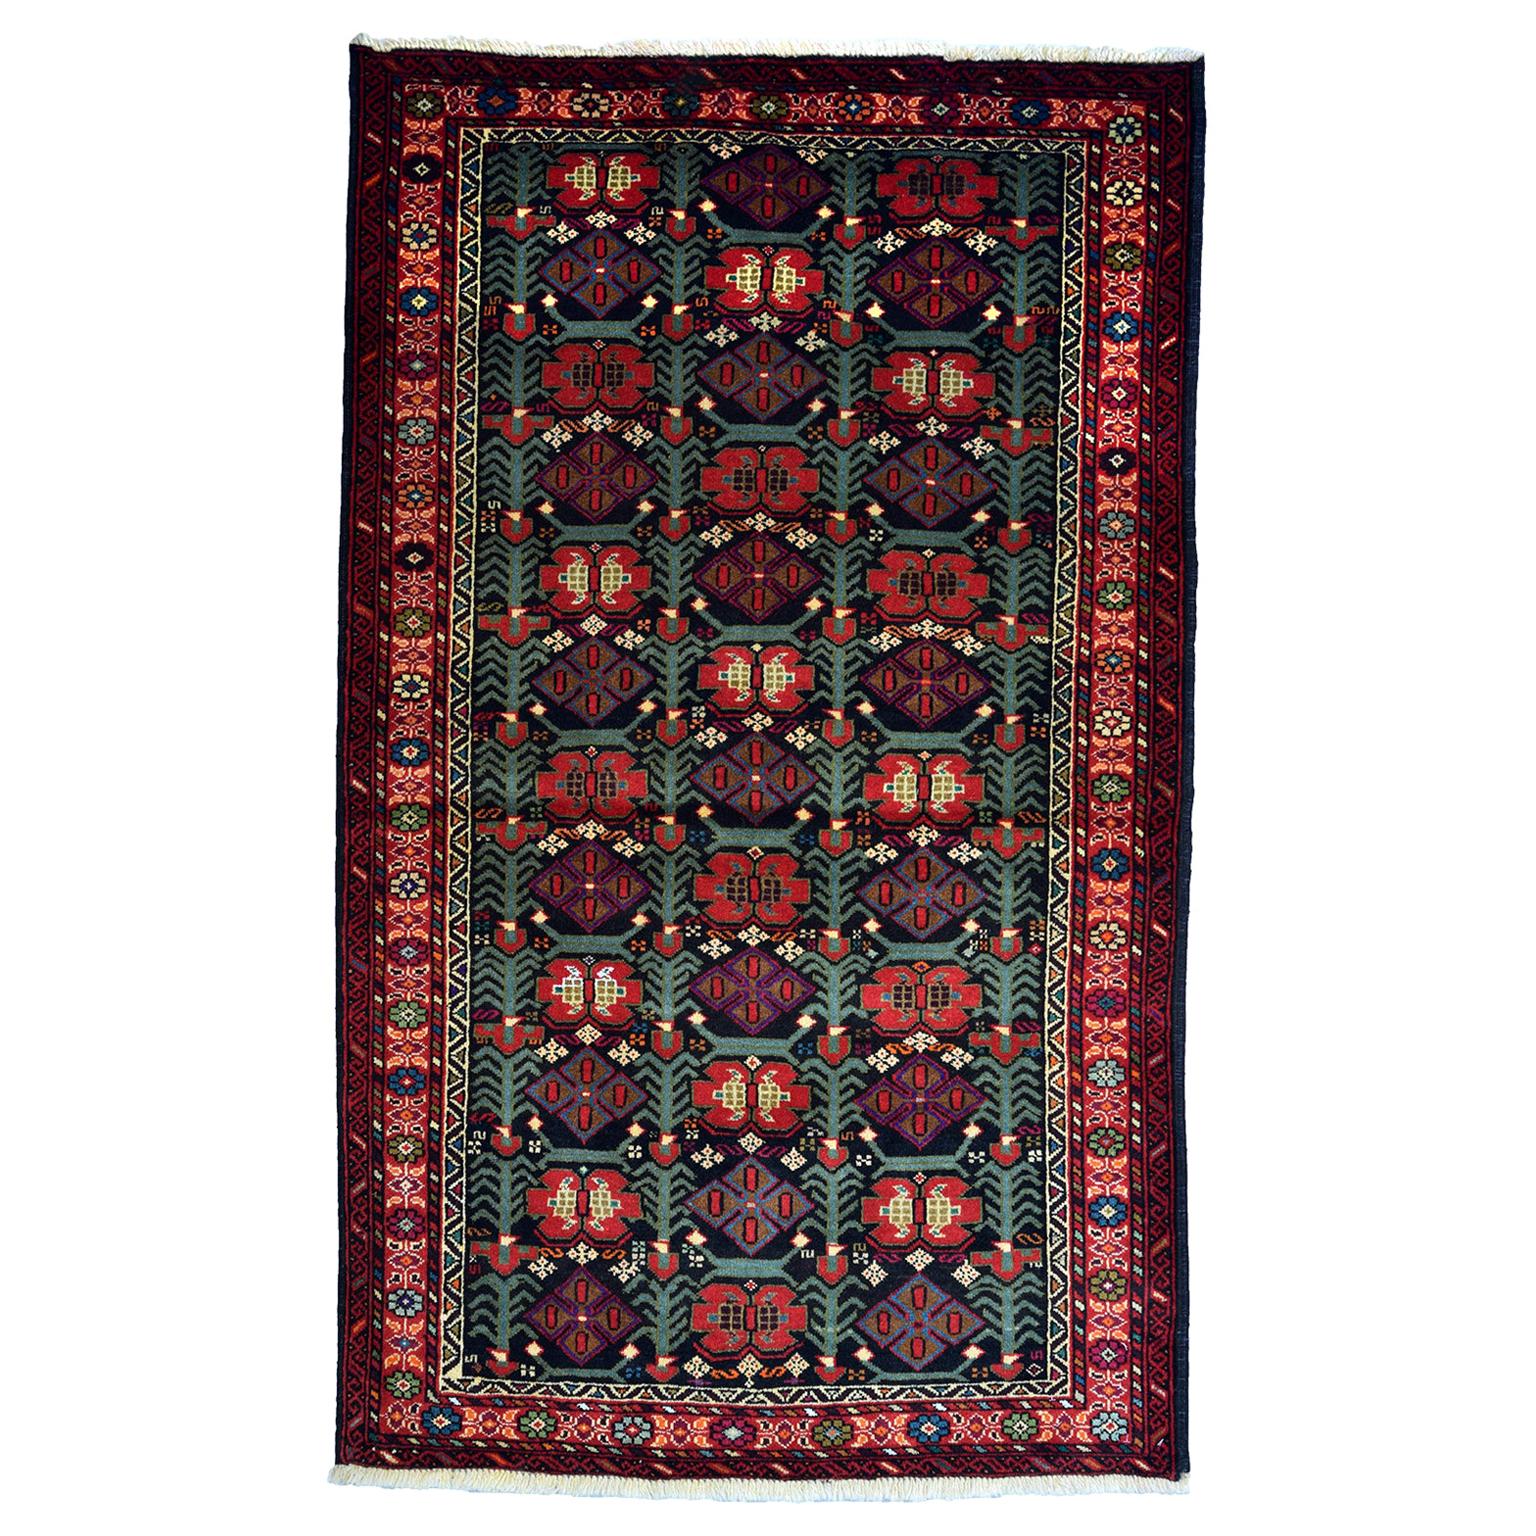 Vintage 1950s Wool Persian Balouchi Rug, 3' x 5' For Sale